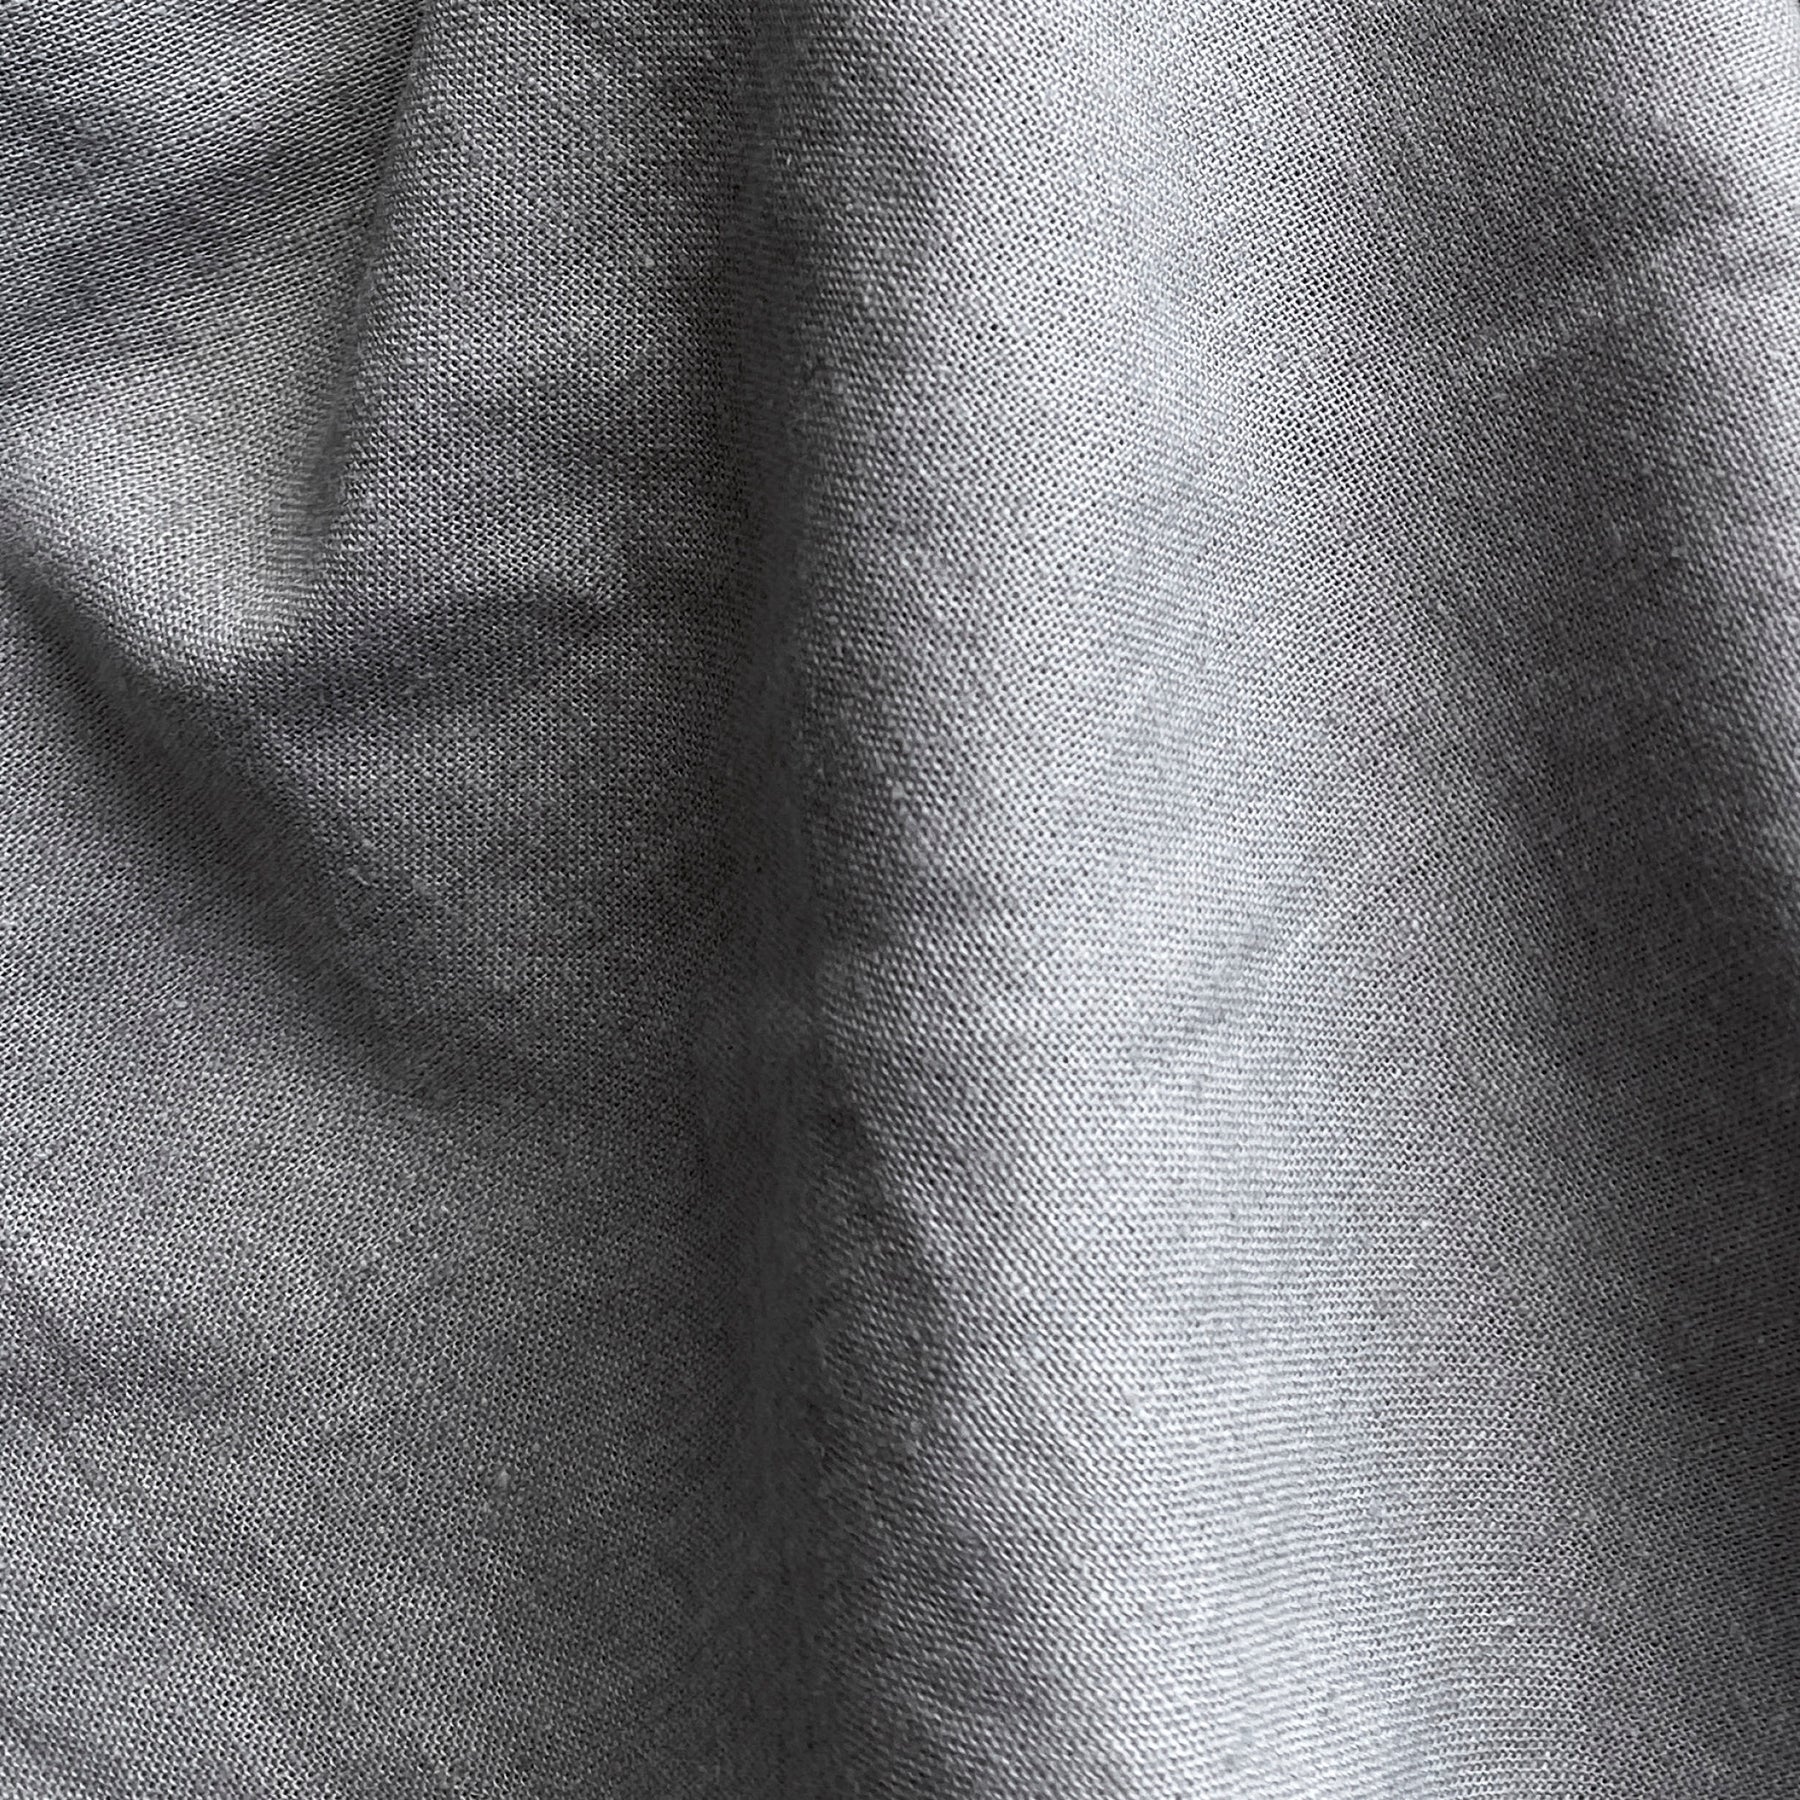 Close-up image of Stone Gray Blended Linen